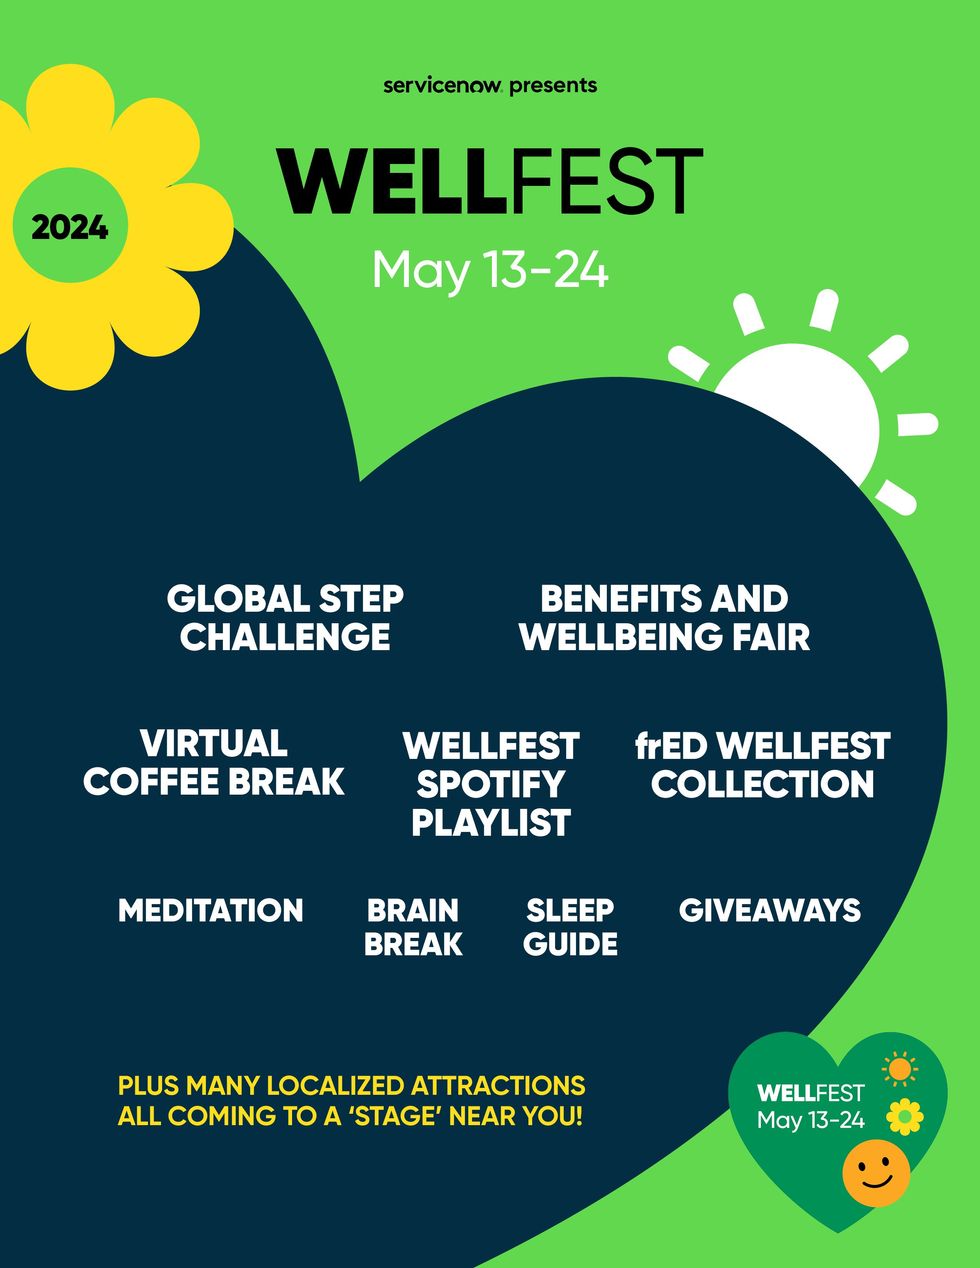 The schedule of events for ServiceNow's WellFest 2024